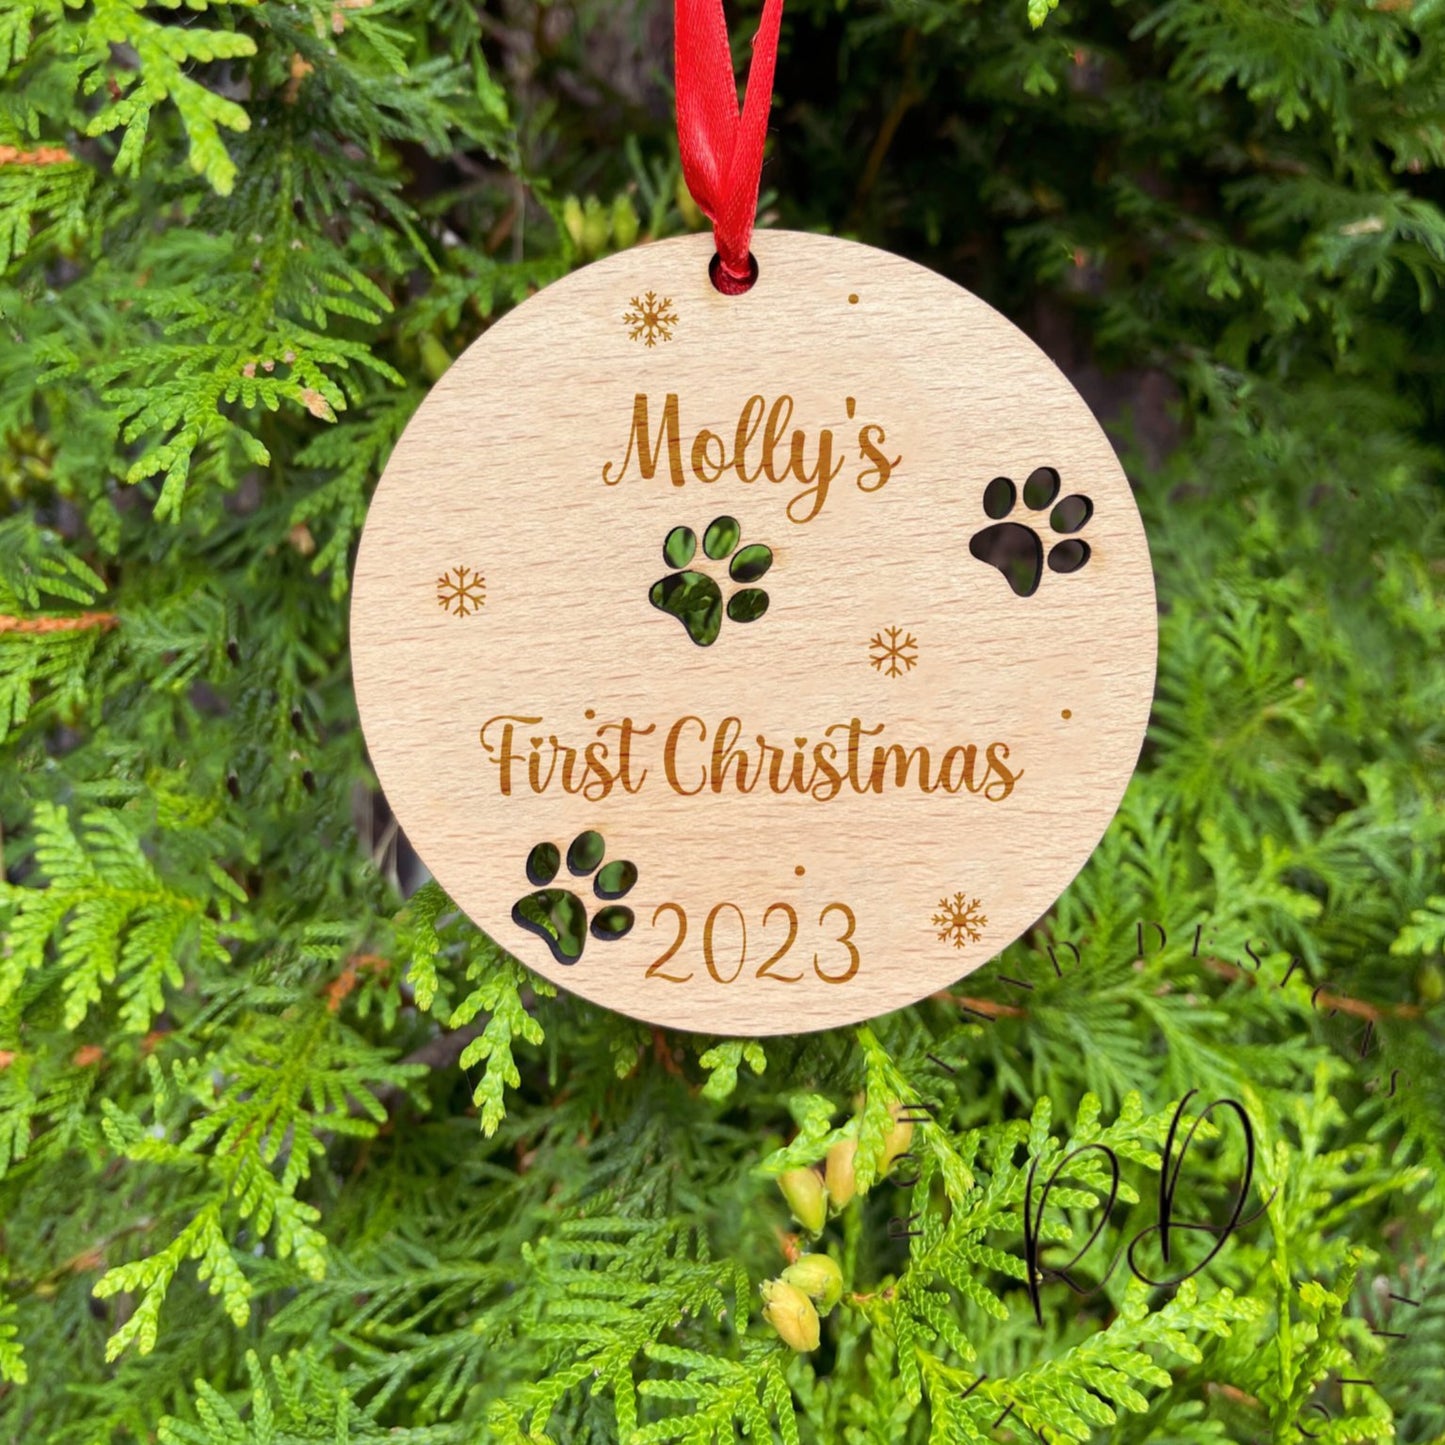 Lovely Rustic Bauble for their Furry Friend, Personalised with Name & Year, Beautiful Paw Print Cut-Out, Crafted from Natural Wood